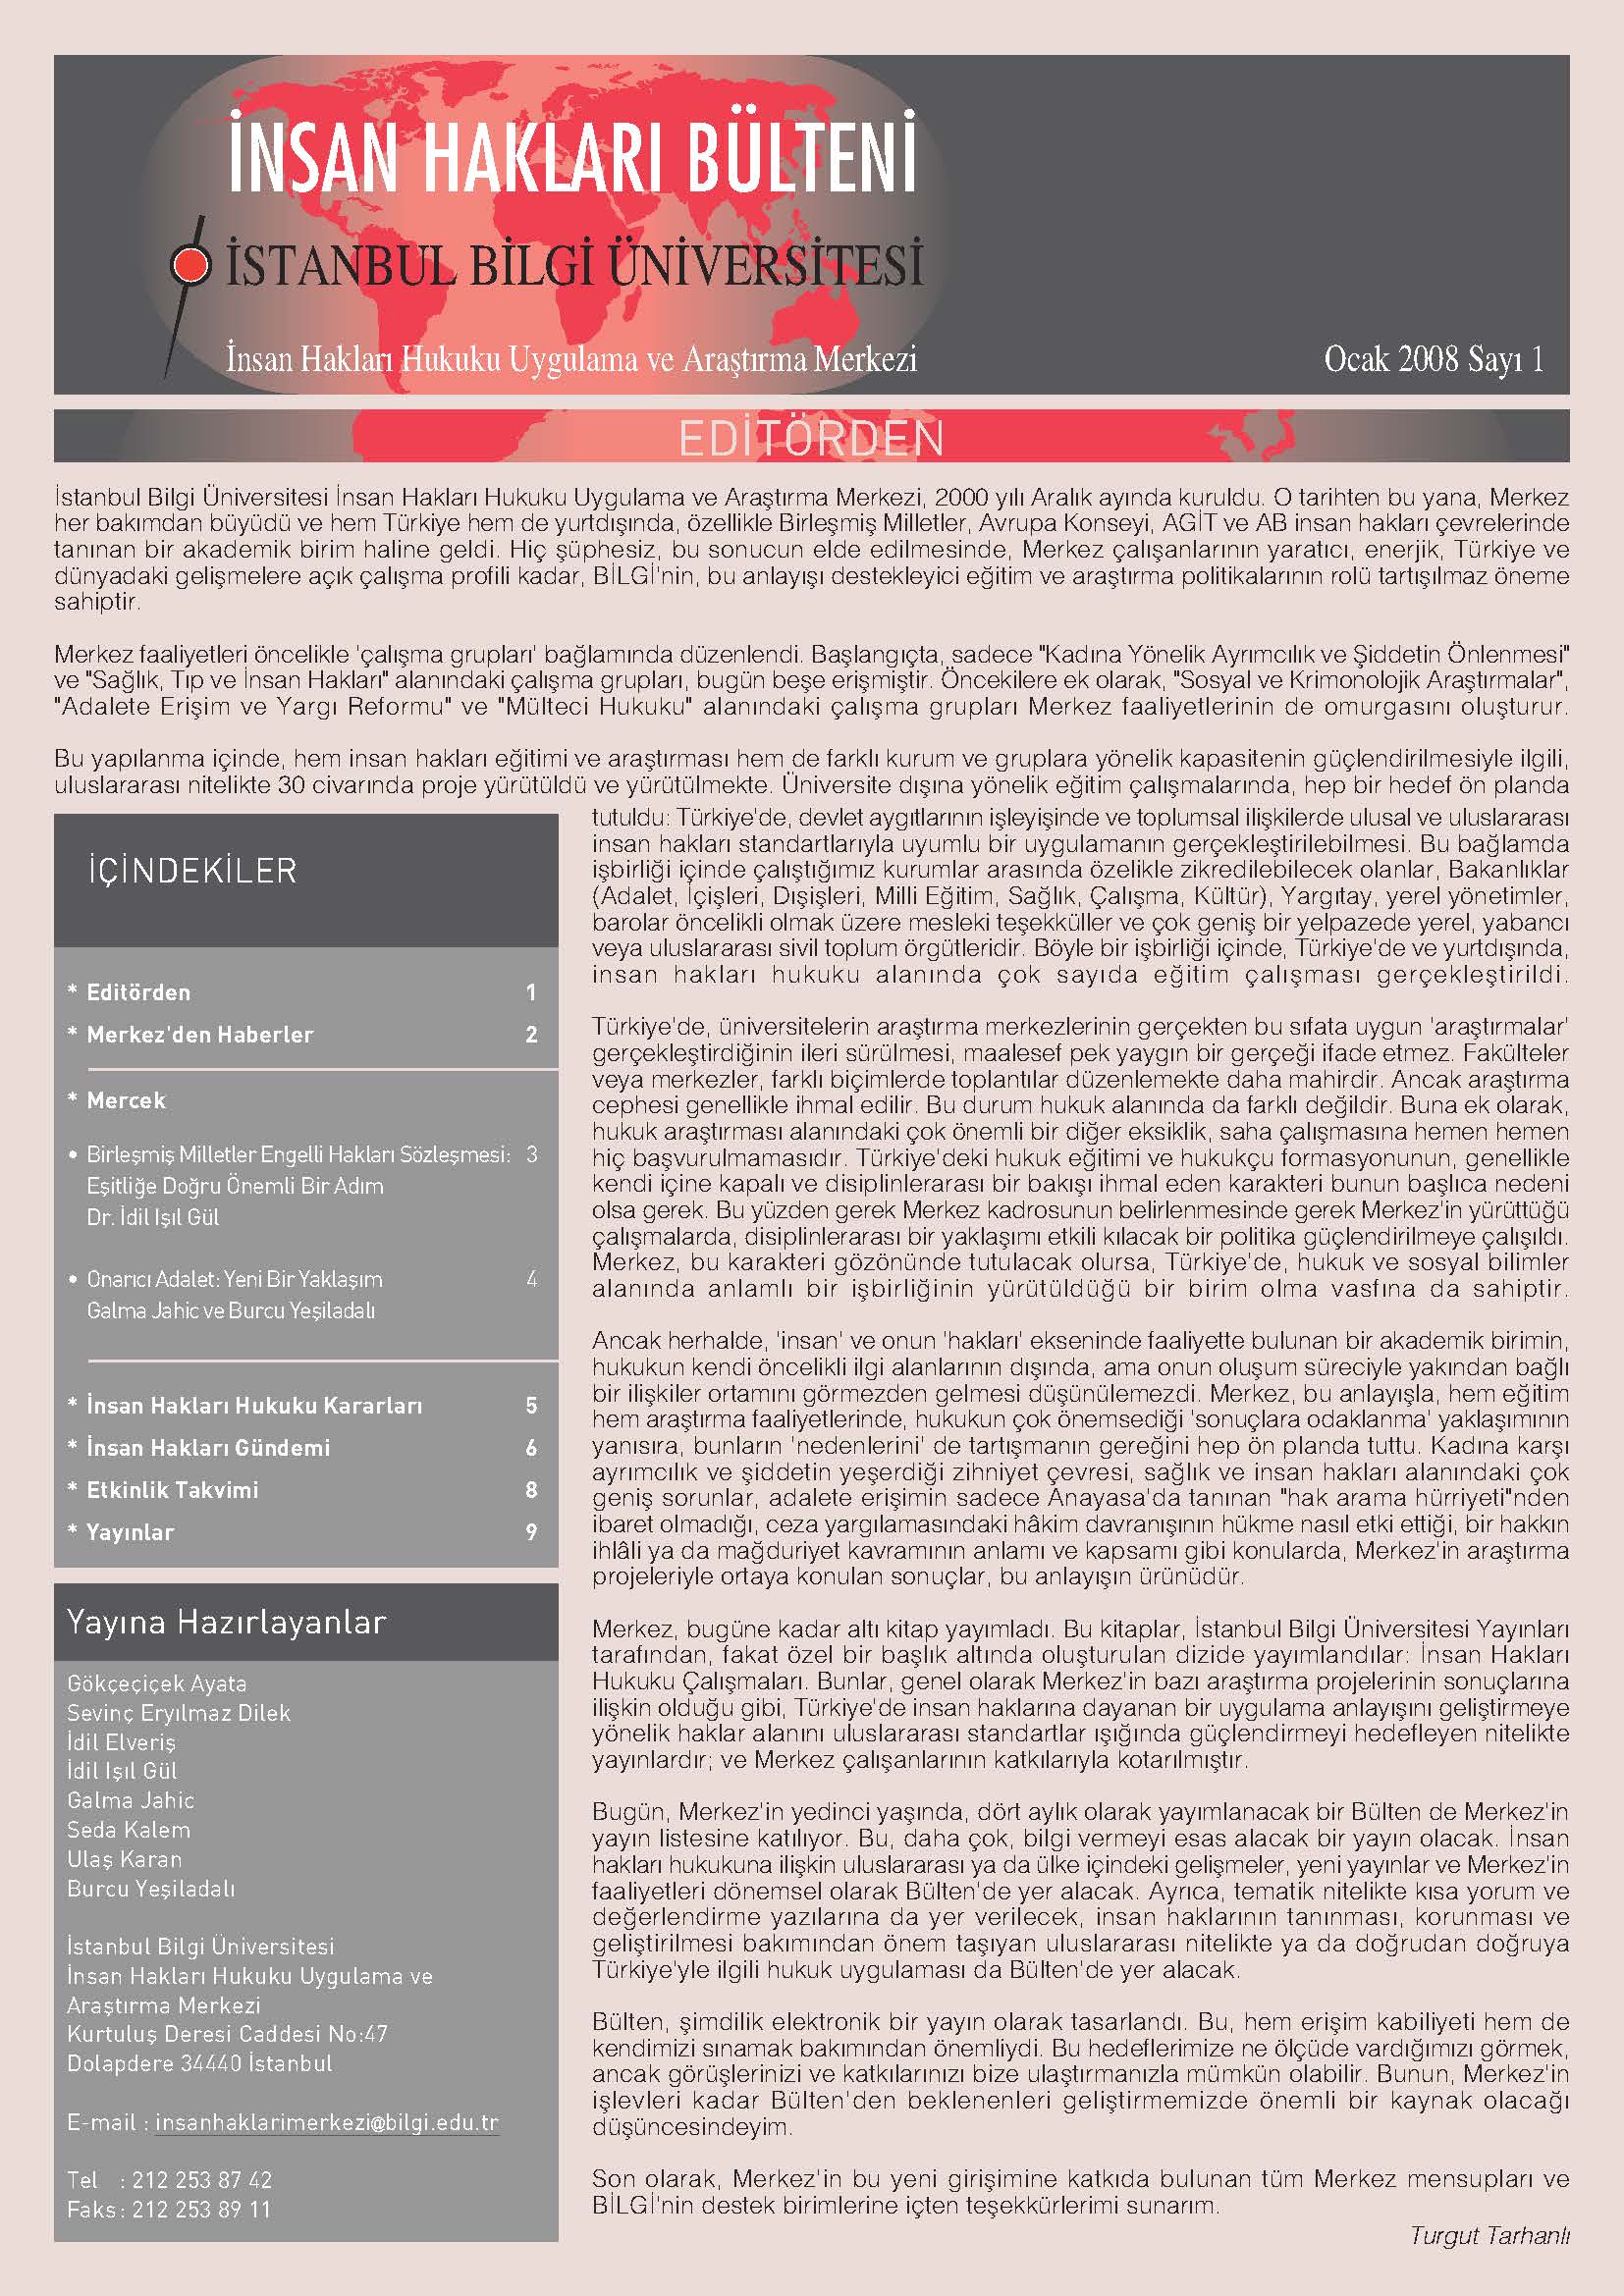 Human Rights Bulletin, January 2008, Issue 1